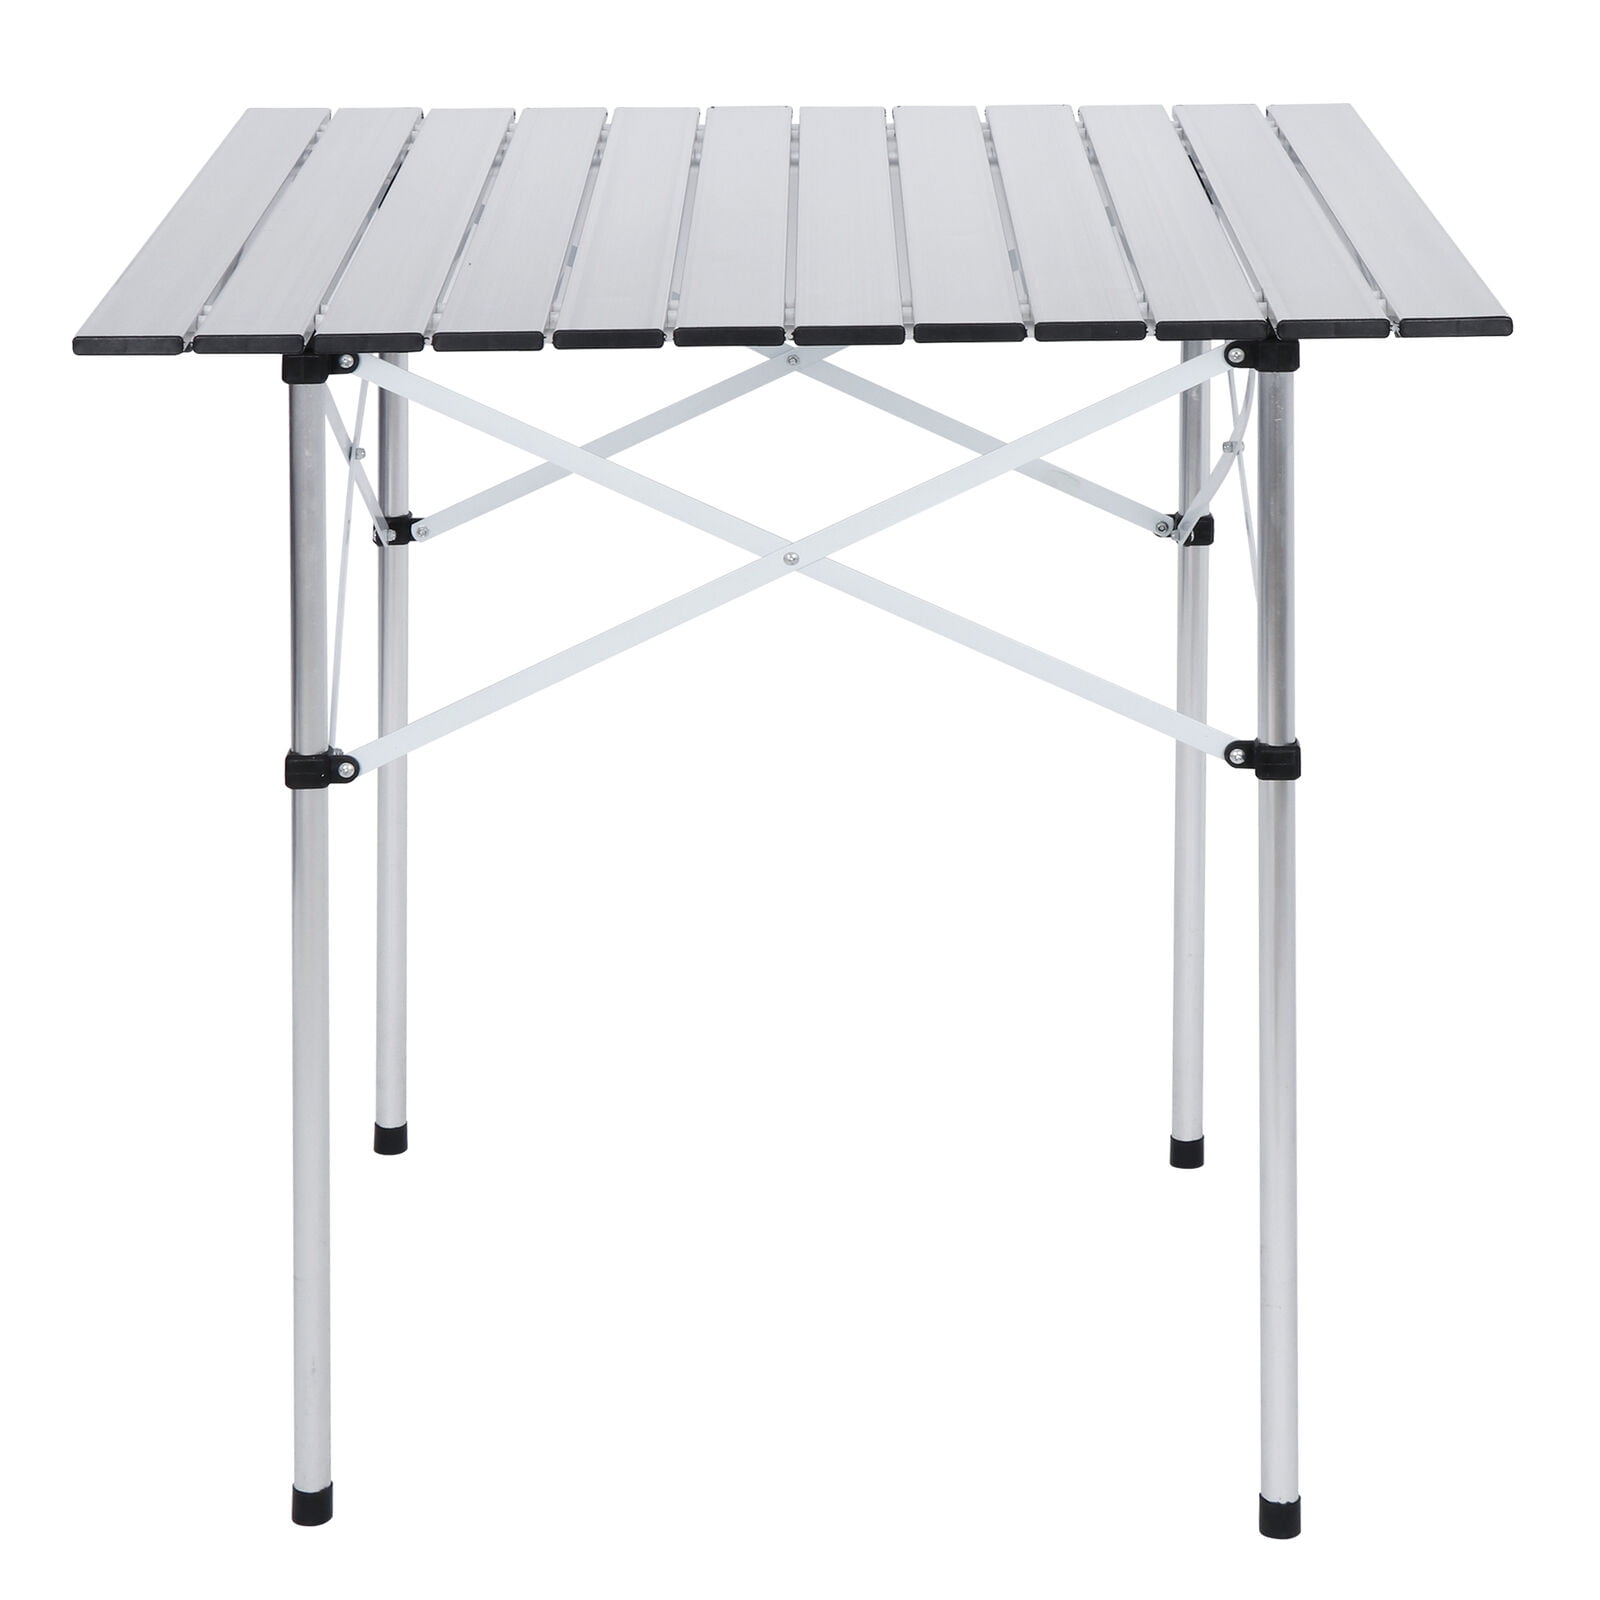 Folding Camping Table Compact Aluminum Roll Top Table with Carry Bag Portable Lightweight for Beach BBQ Picnic Cooking Fishing Brown 